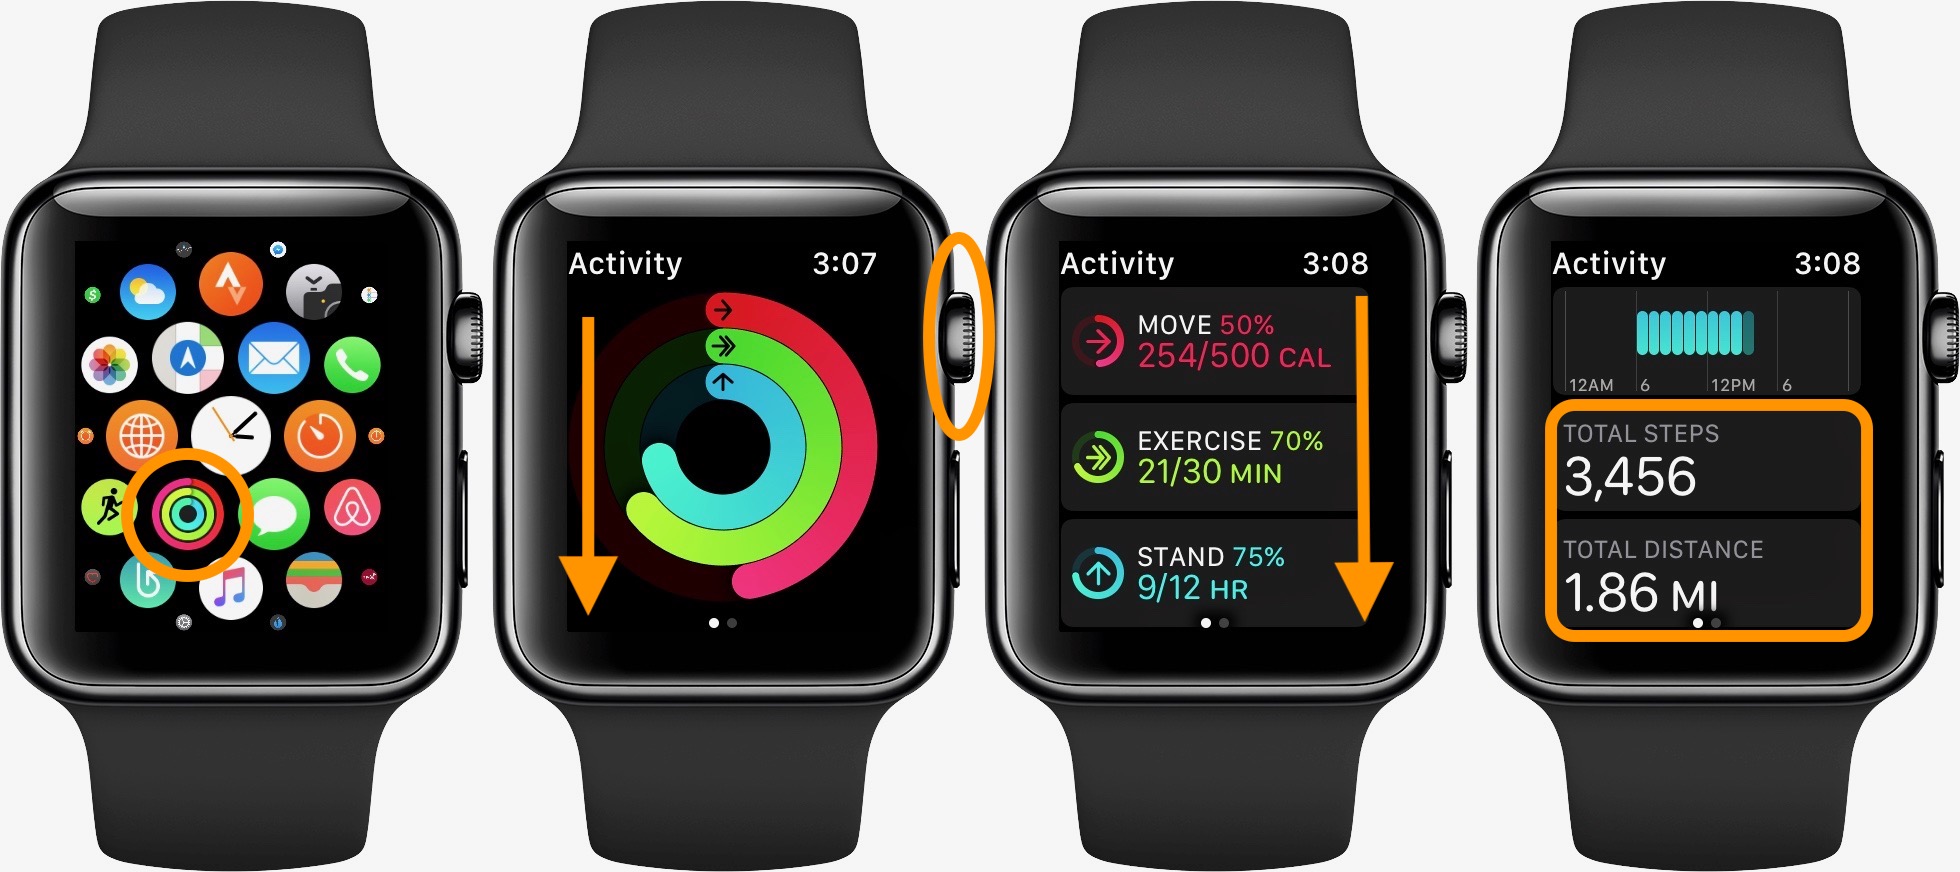 apple watch location tracking